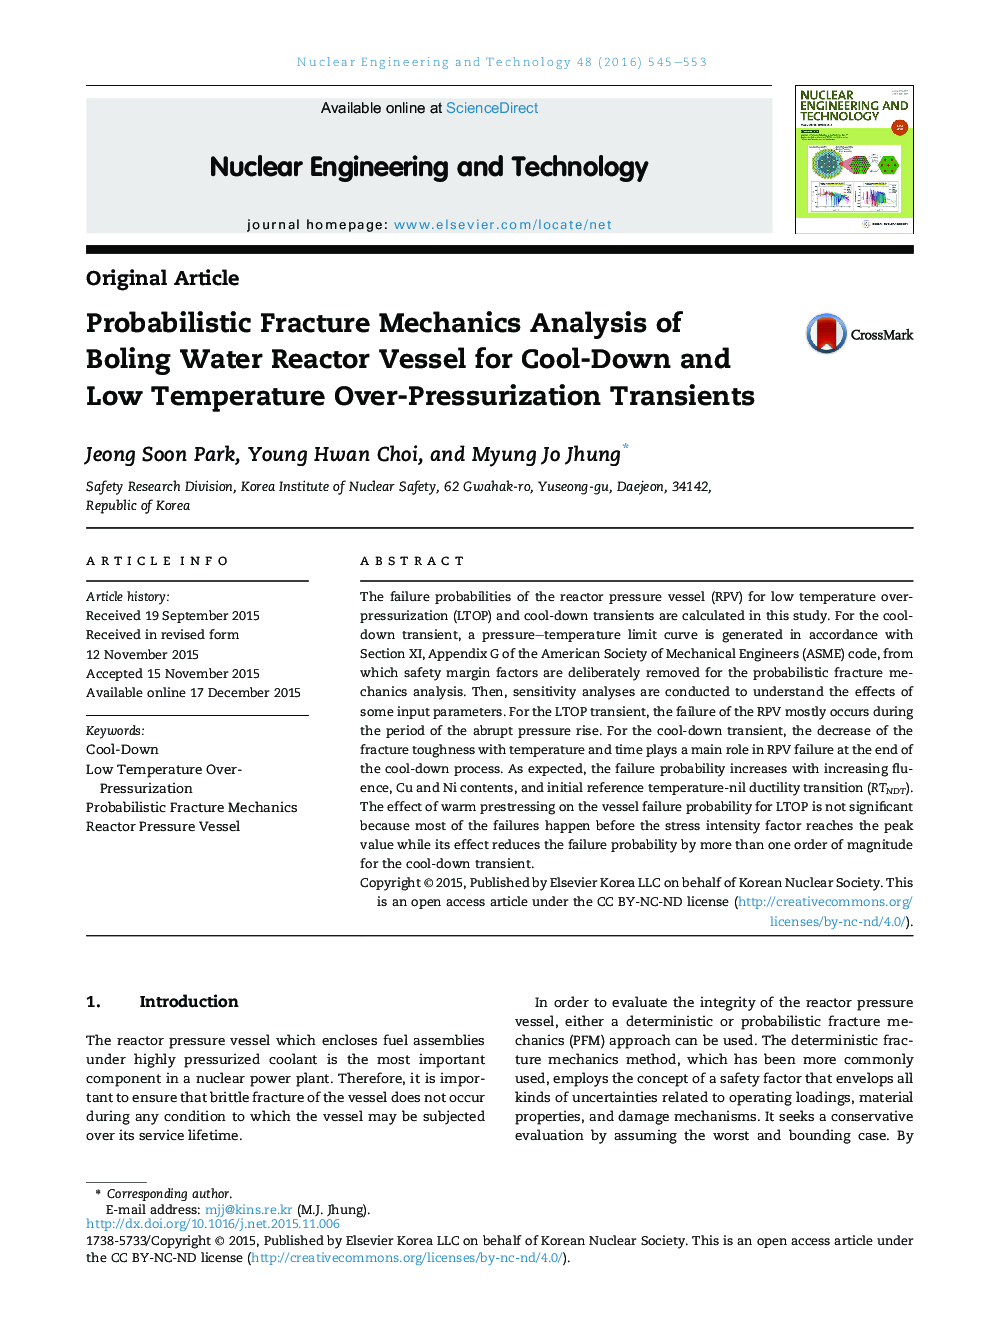 Probabilistic Fracture Mechanics Analysis of Boling Water Reactor Vessel for Cool-Down and Low Temperature Over-Pressurization Transients